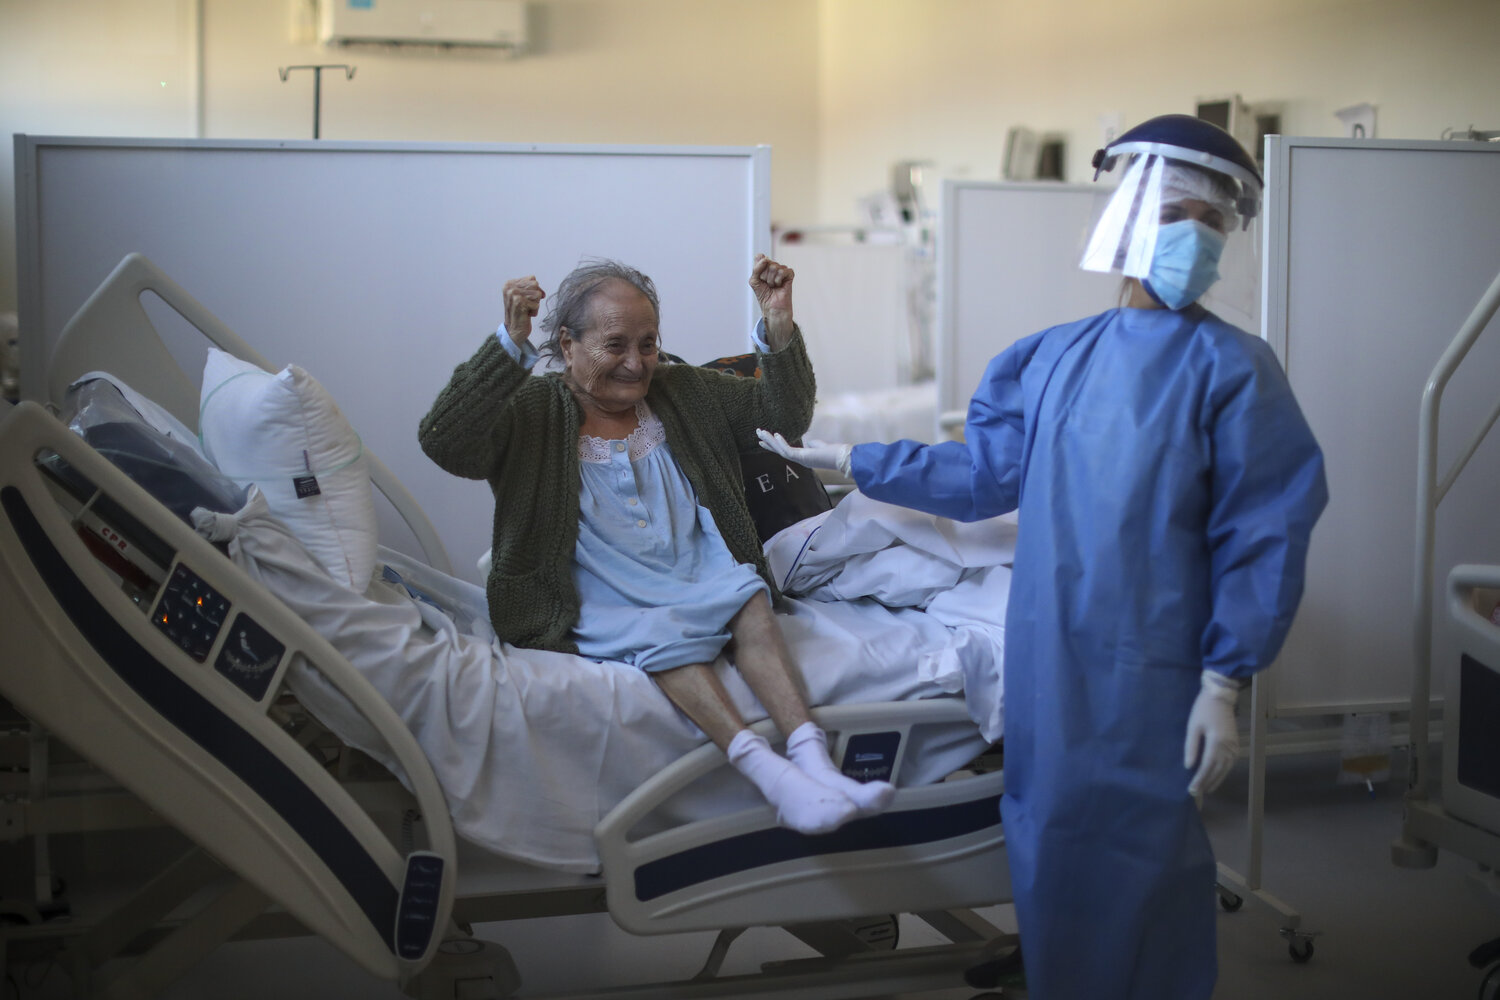  Blanca Ortiz, 84, celebrates after learning from nurses that she will be dismissed from the Eurnekian Ezeiza Hospital, on the outskirts of Buenos Aires, Argentina, Aug. 13, 2020, several weeks after being admitted with COVID-19. (AP Photo/Natacha Pisarenko) 